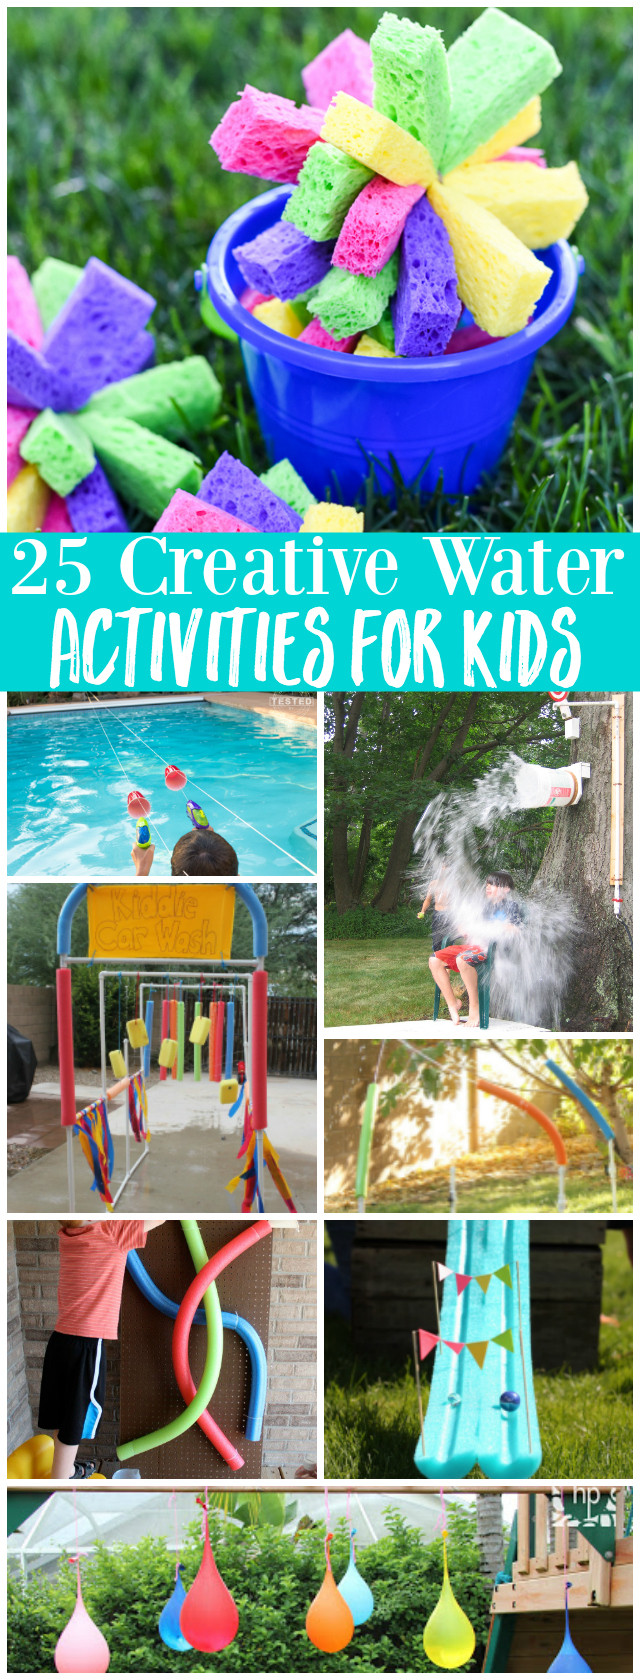 Water Crafts For Kids
 25 Creative Water Activities for Kids